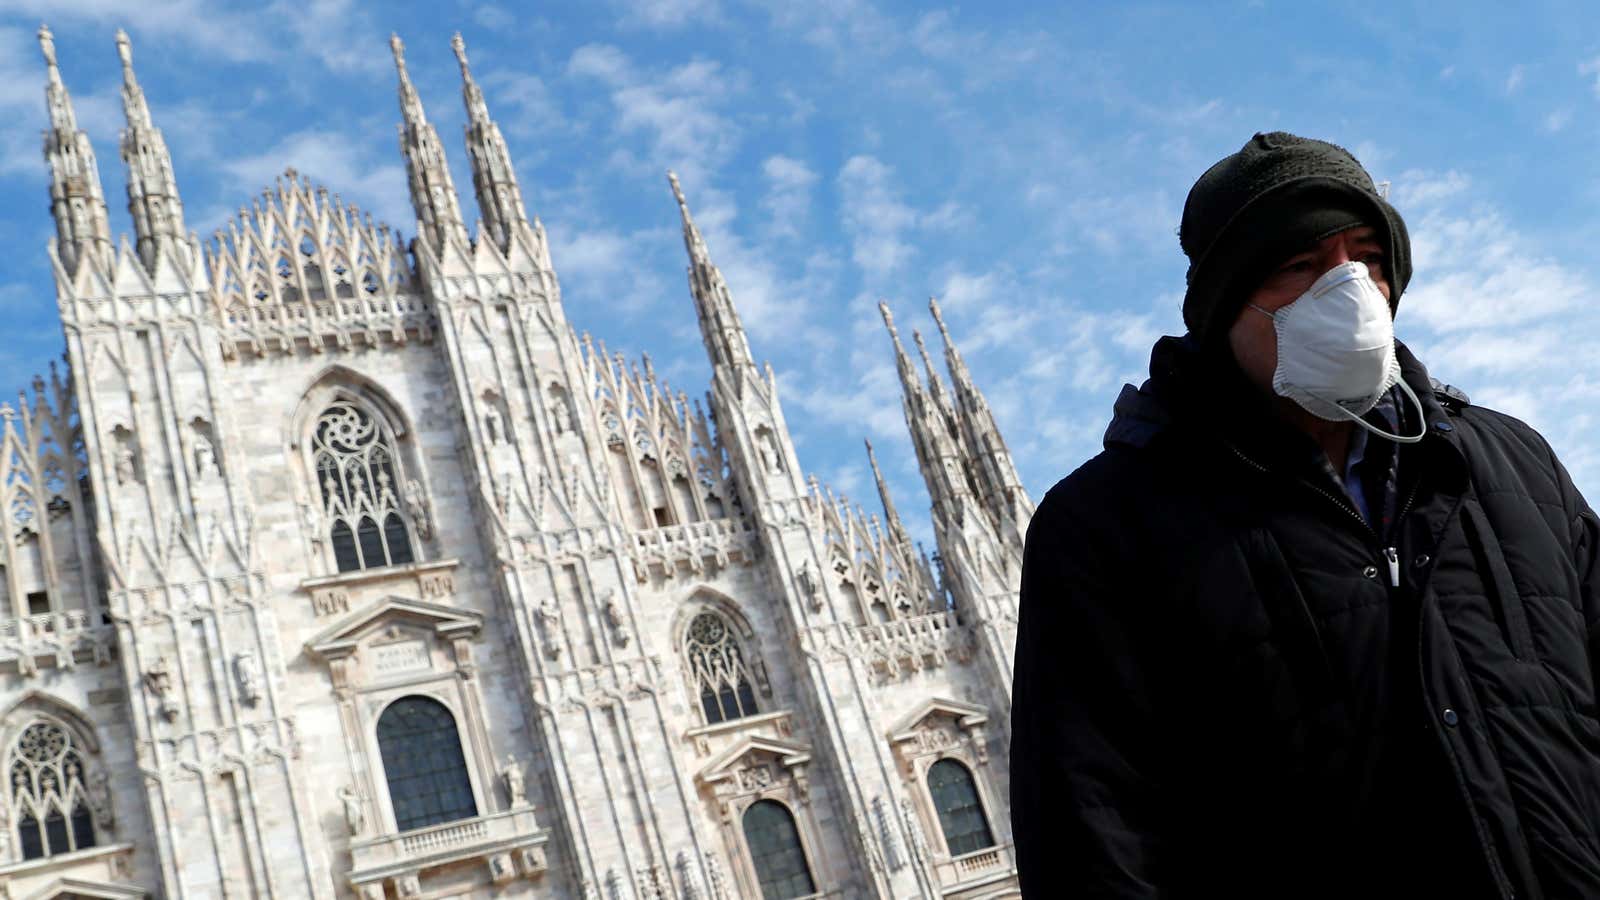 A man in front of the Duomo Cathedral in Milan